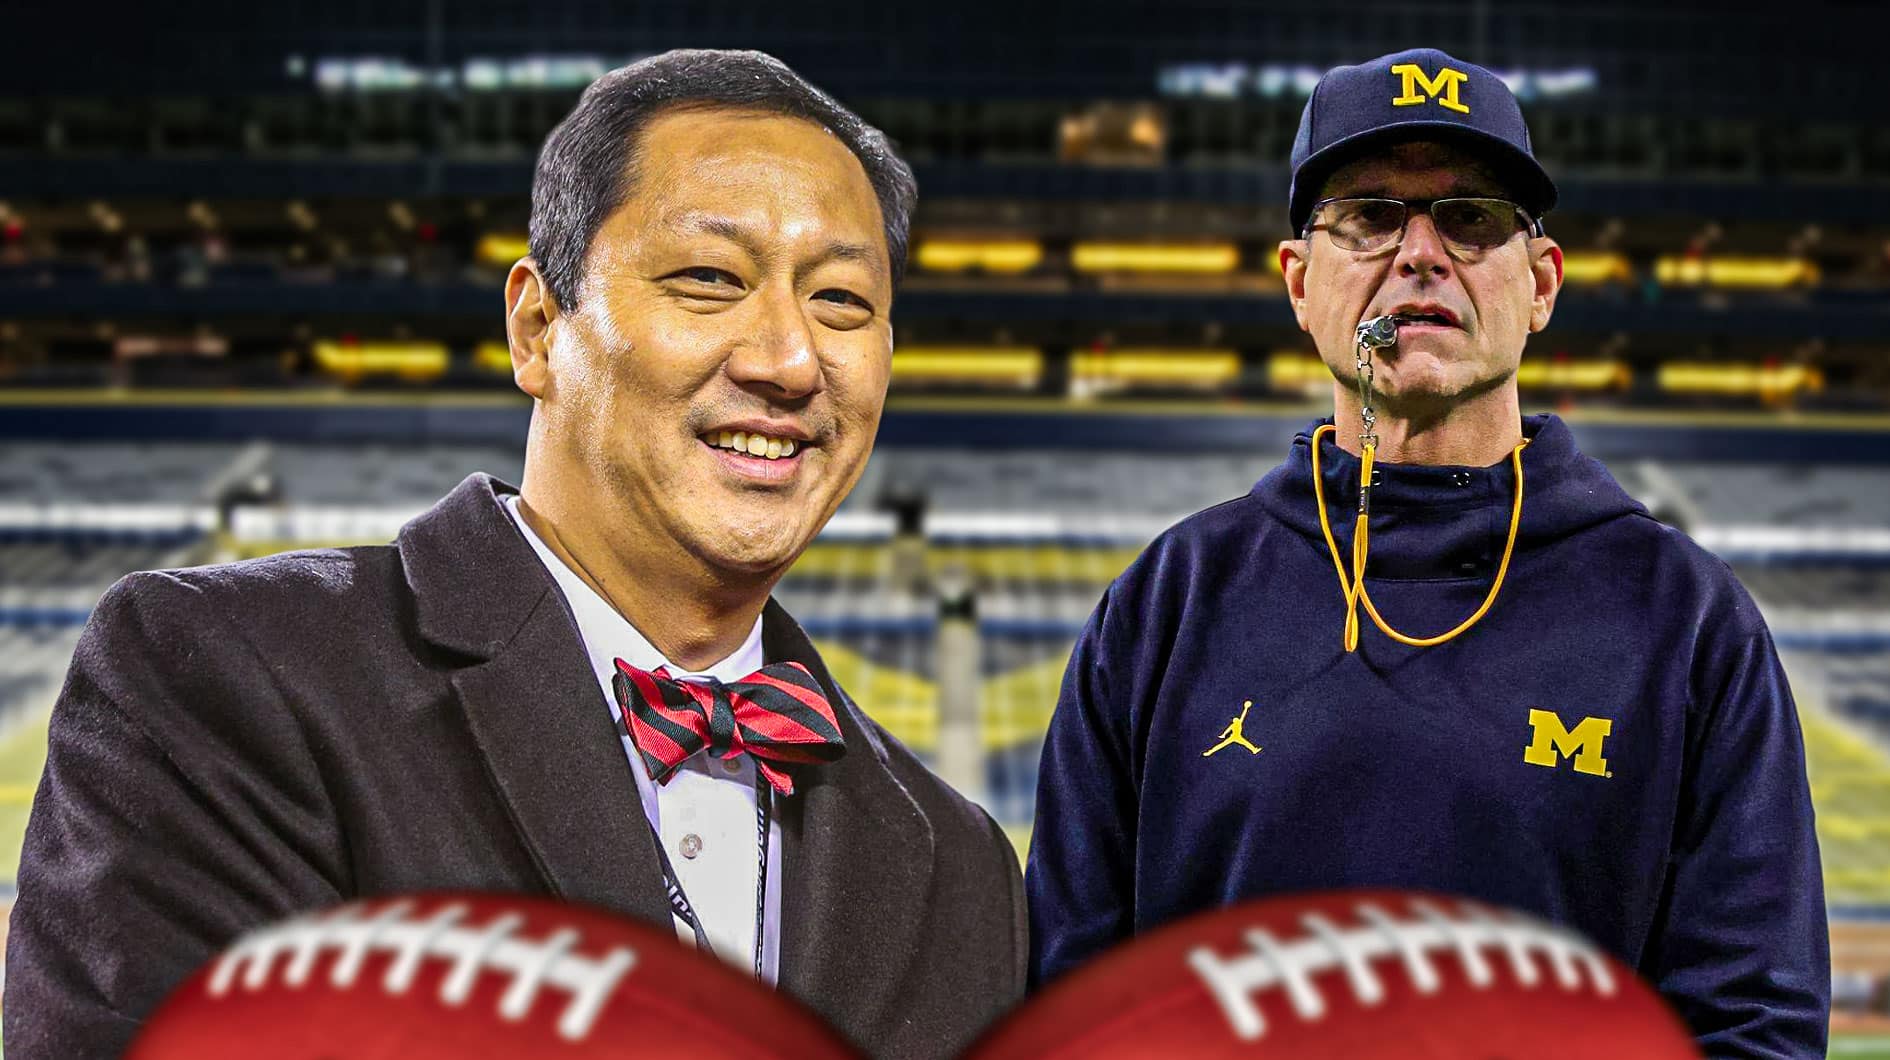 Michigan football: Wolverines president has strong Jim Harbaugh message  ahead of Big Ten title game